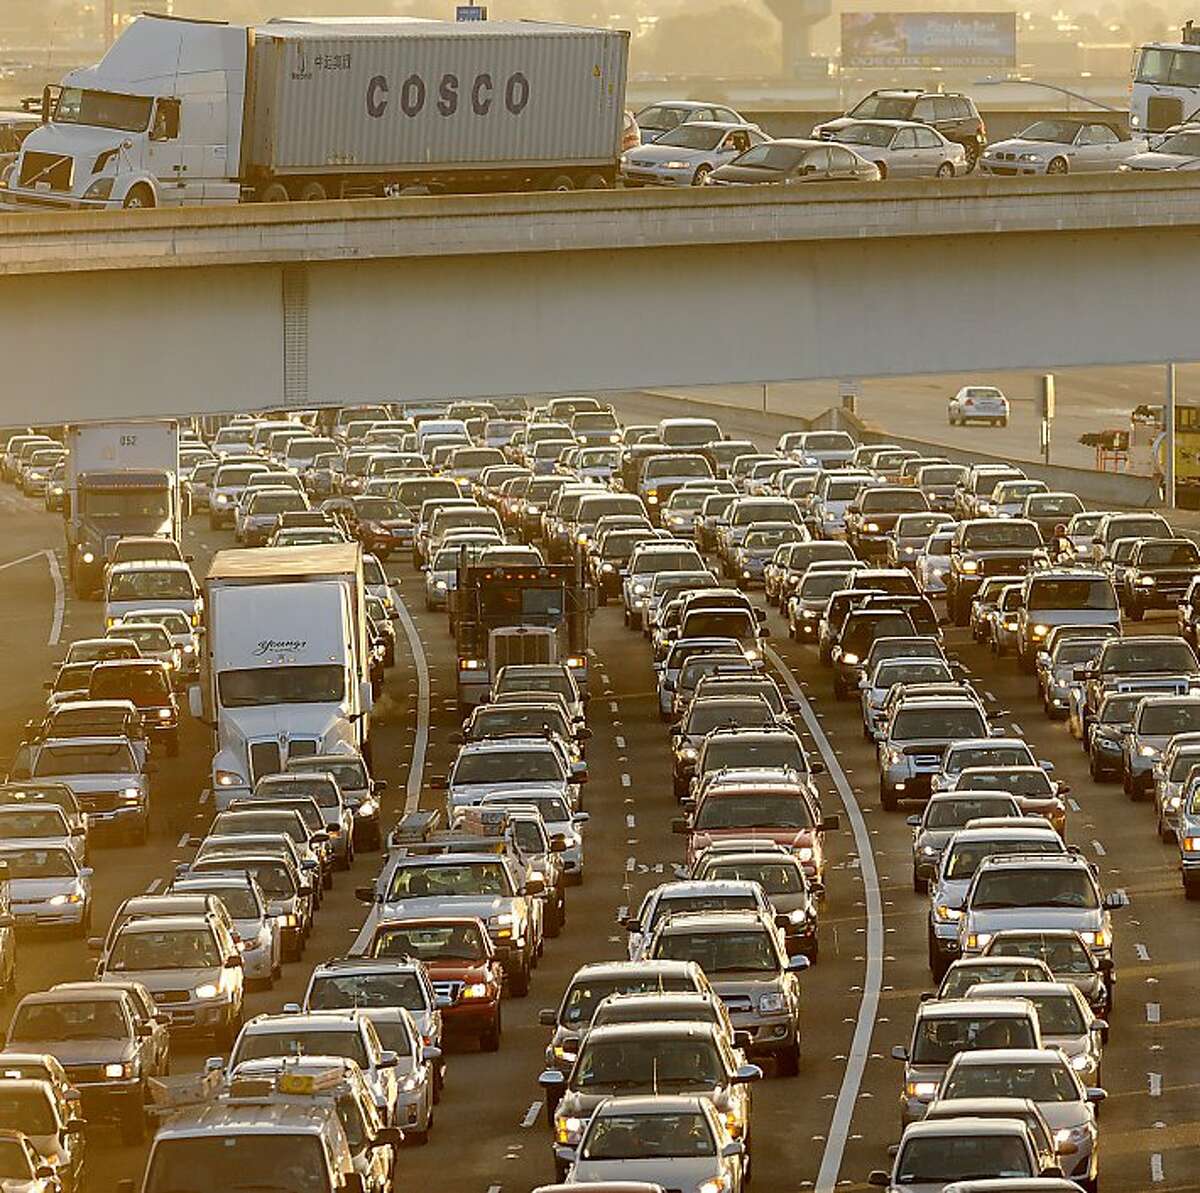 Traffic crawls towards the Bay Bridge toll plaza on Friday, Feb. 8, 2013, in Oakland, Calif. According to the Urban Mobility Report, the Bay Area ties Los Angeles for having the second-worst congestion in the country.